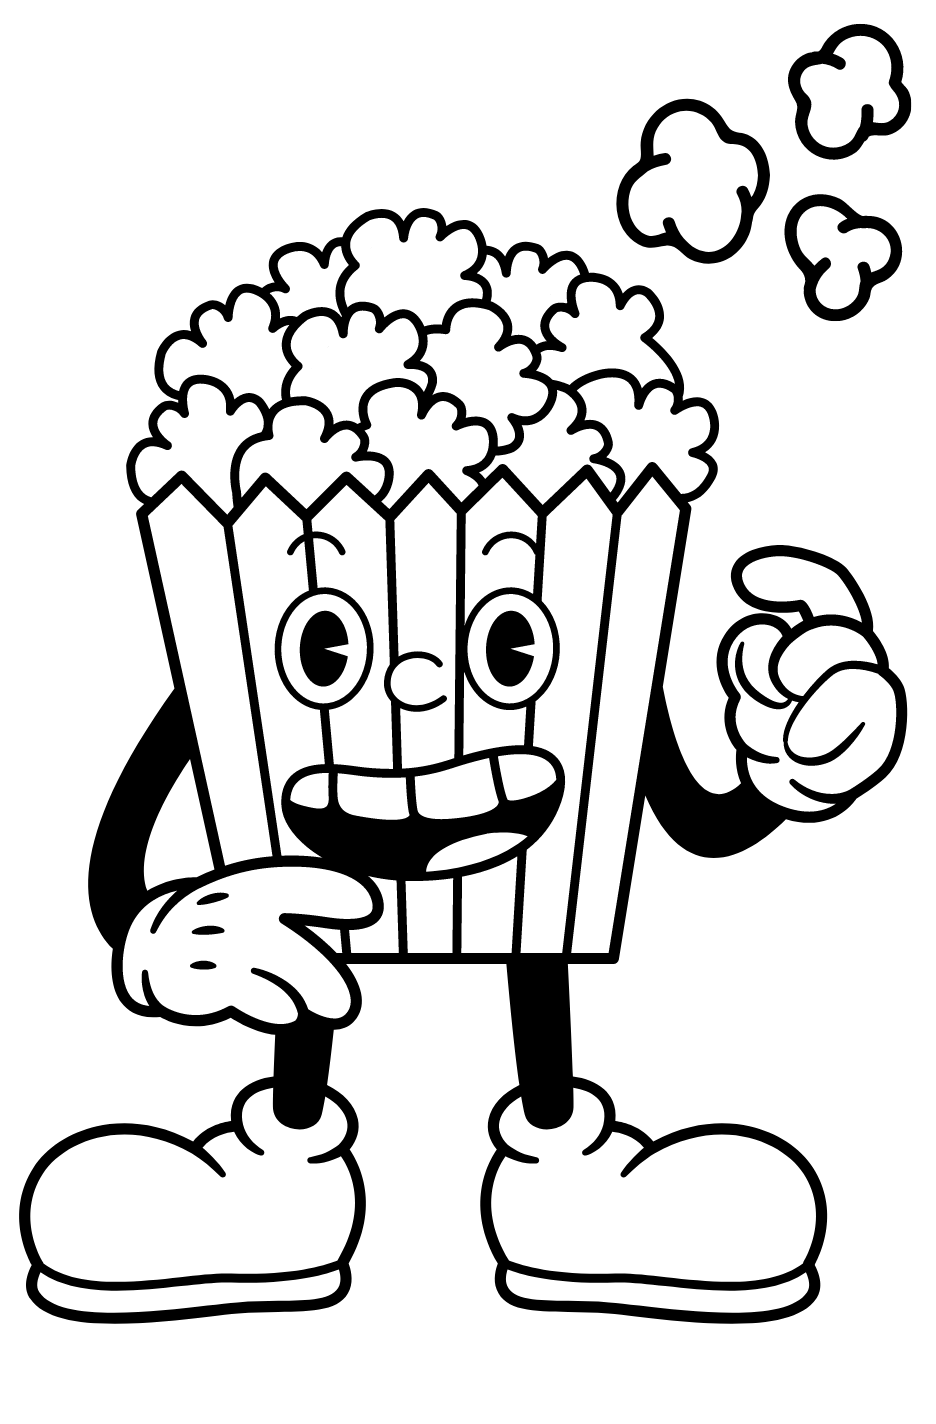 Funny Popcorn Coloring Page